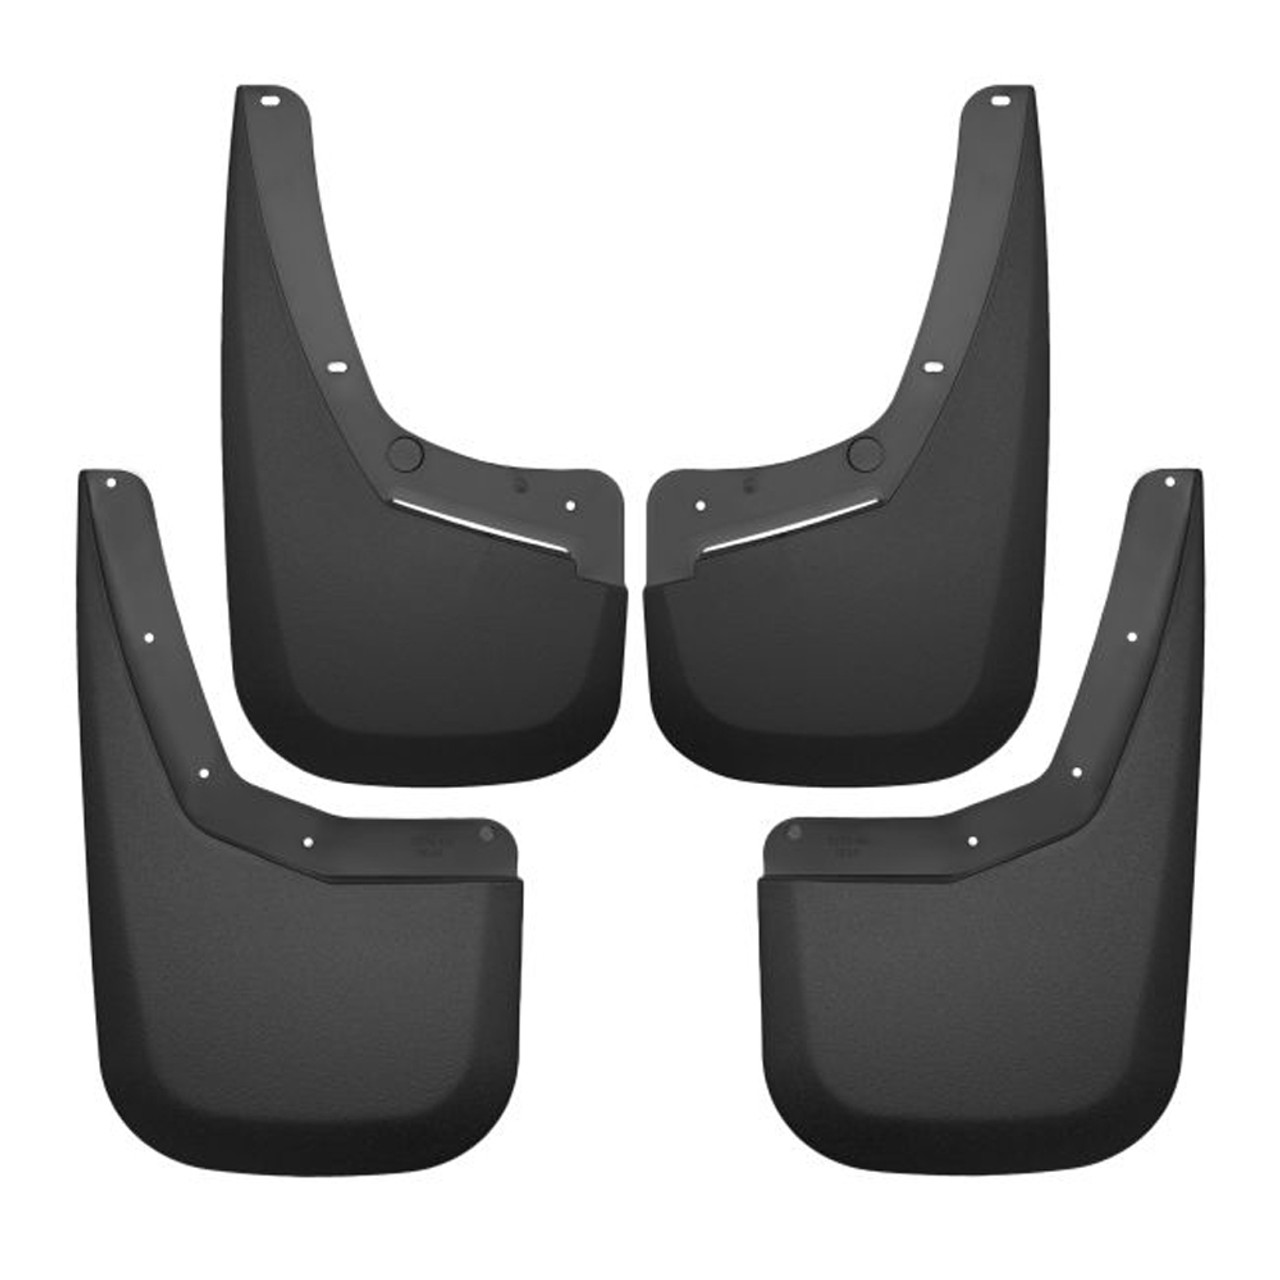 Husky Front and Rear Mud Guard Set - HSK56796